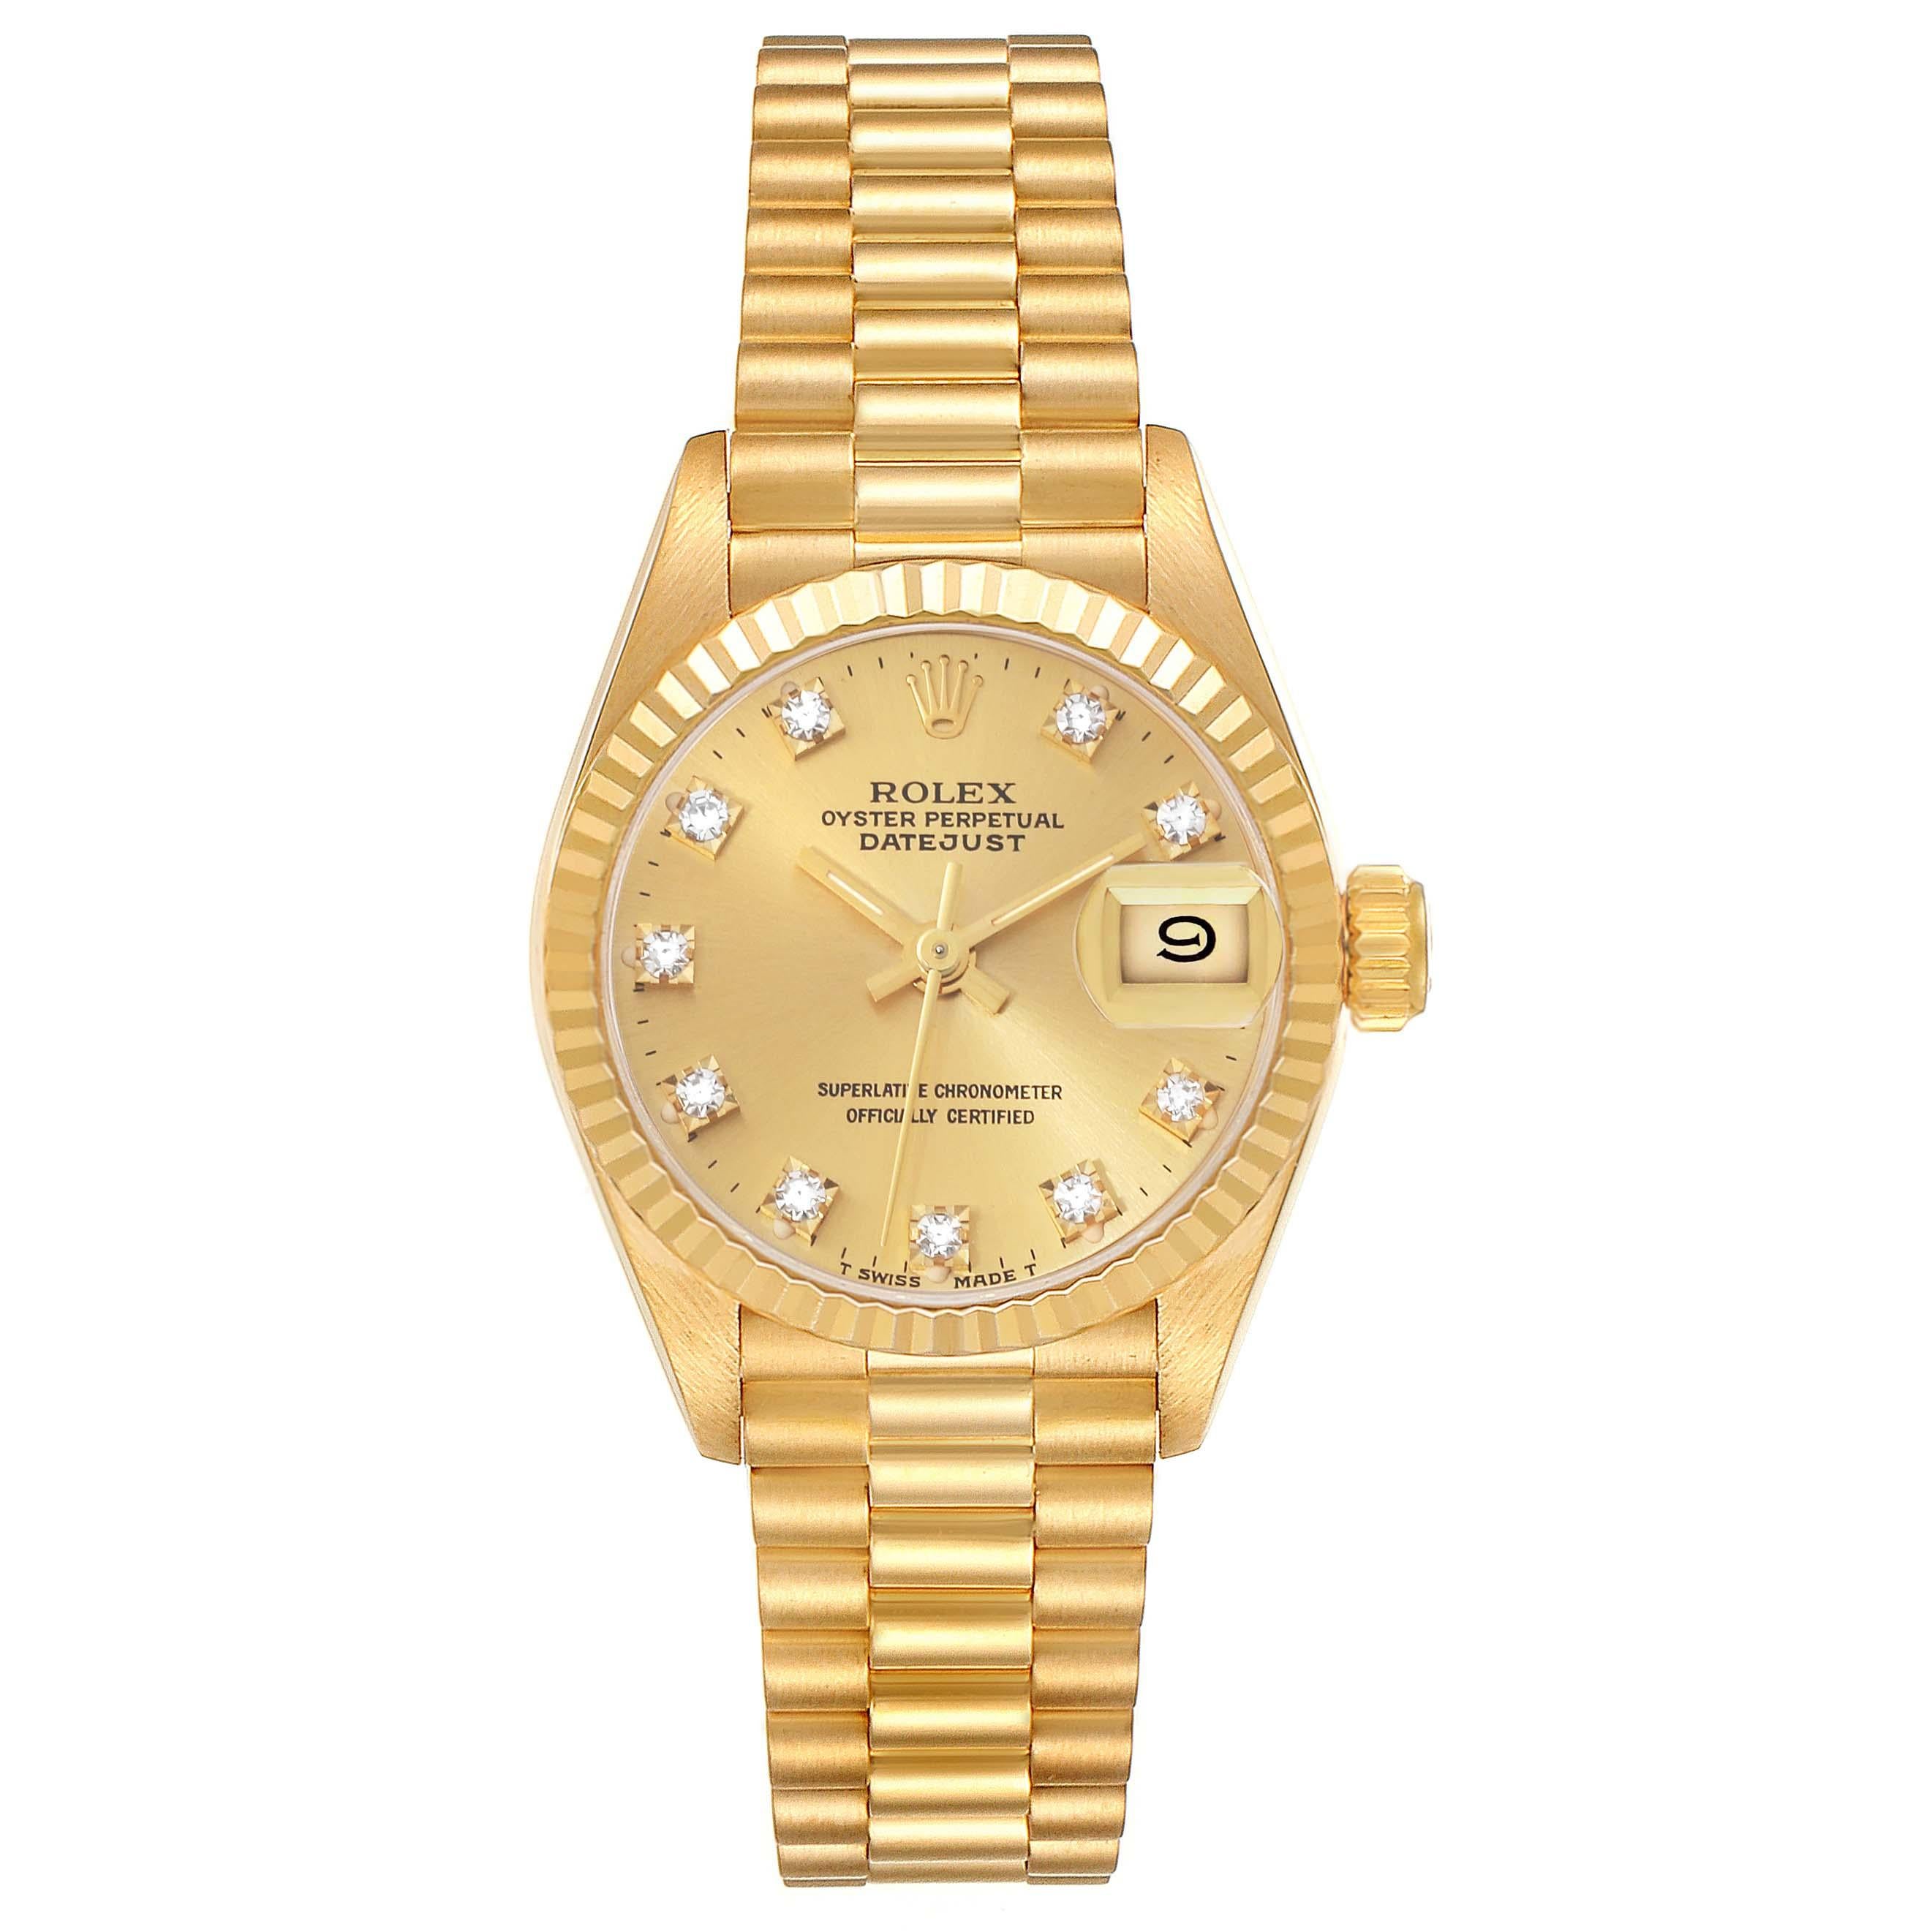 Rolex Datejust President Champagne Diamond Dial Yellow Gold Ladies Watch 69178. Officially certified chronometer automatic self-winding movement. 18k yellow gold oyster case 26.0 mm in diameter. Rolex logo on the crown. 18k yellow gold fluted bezel.